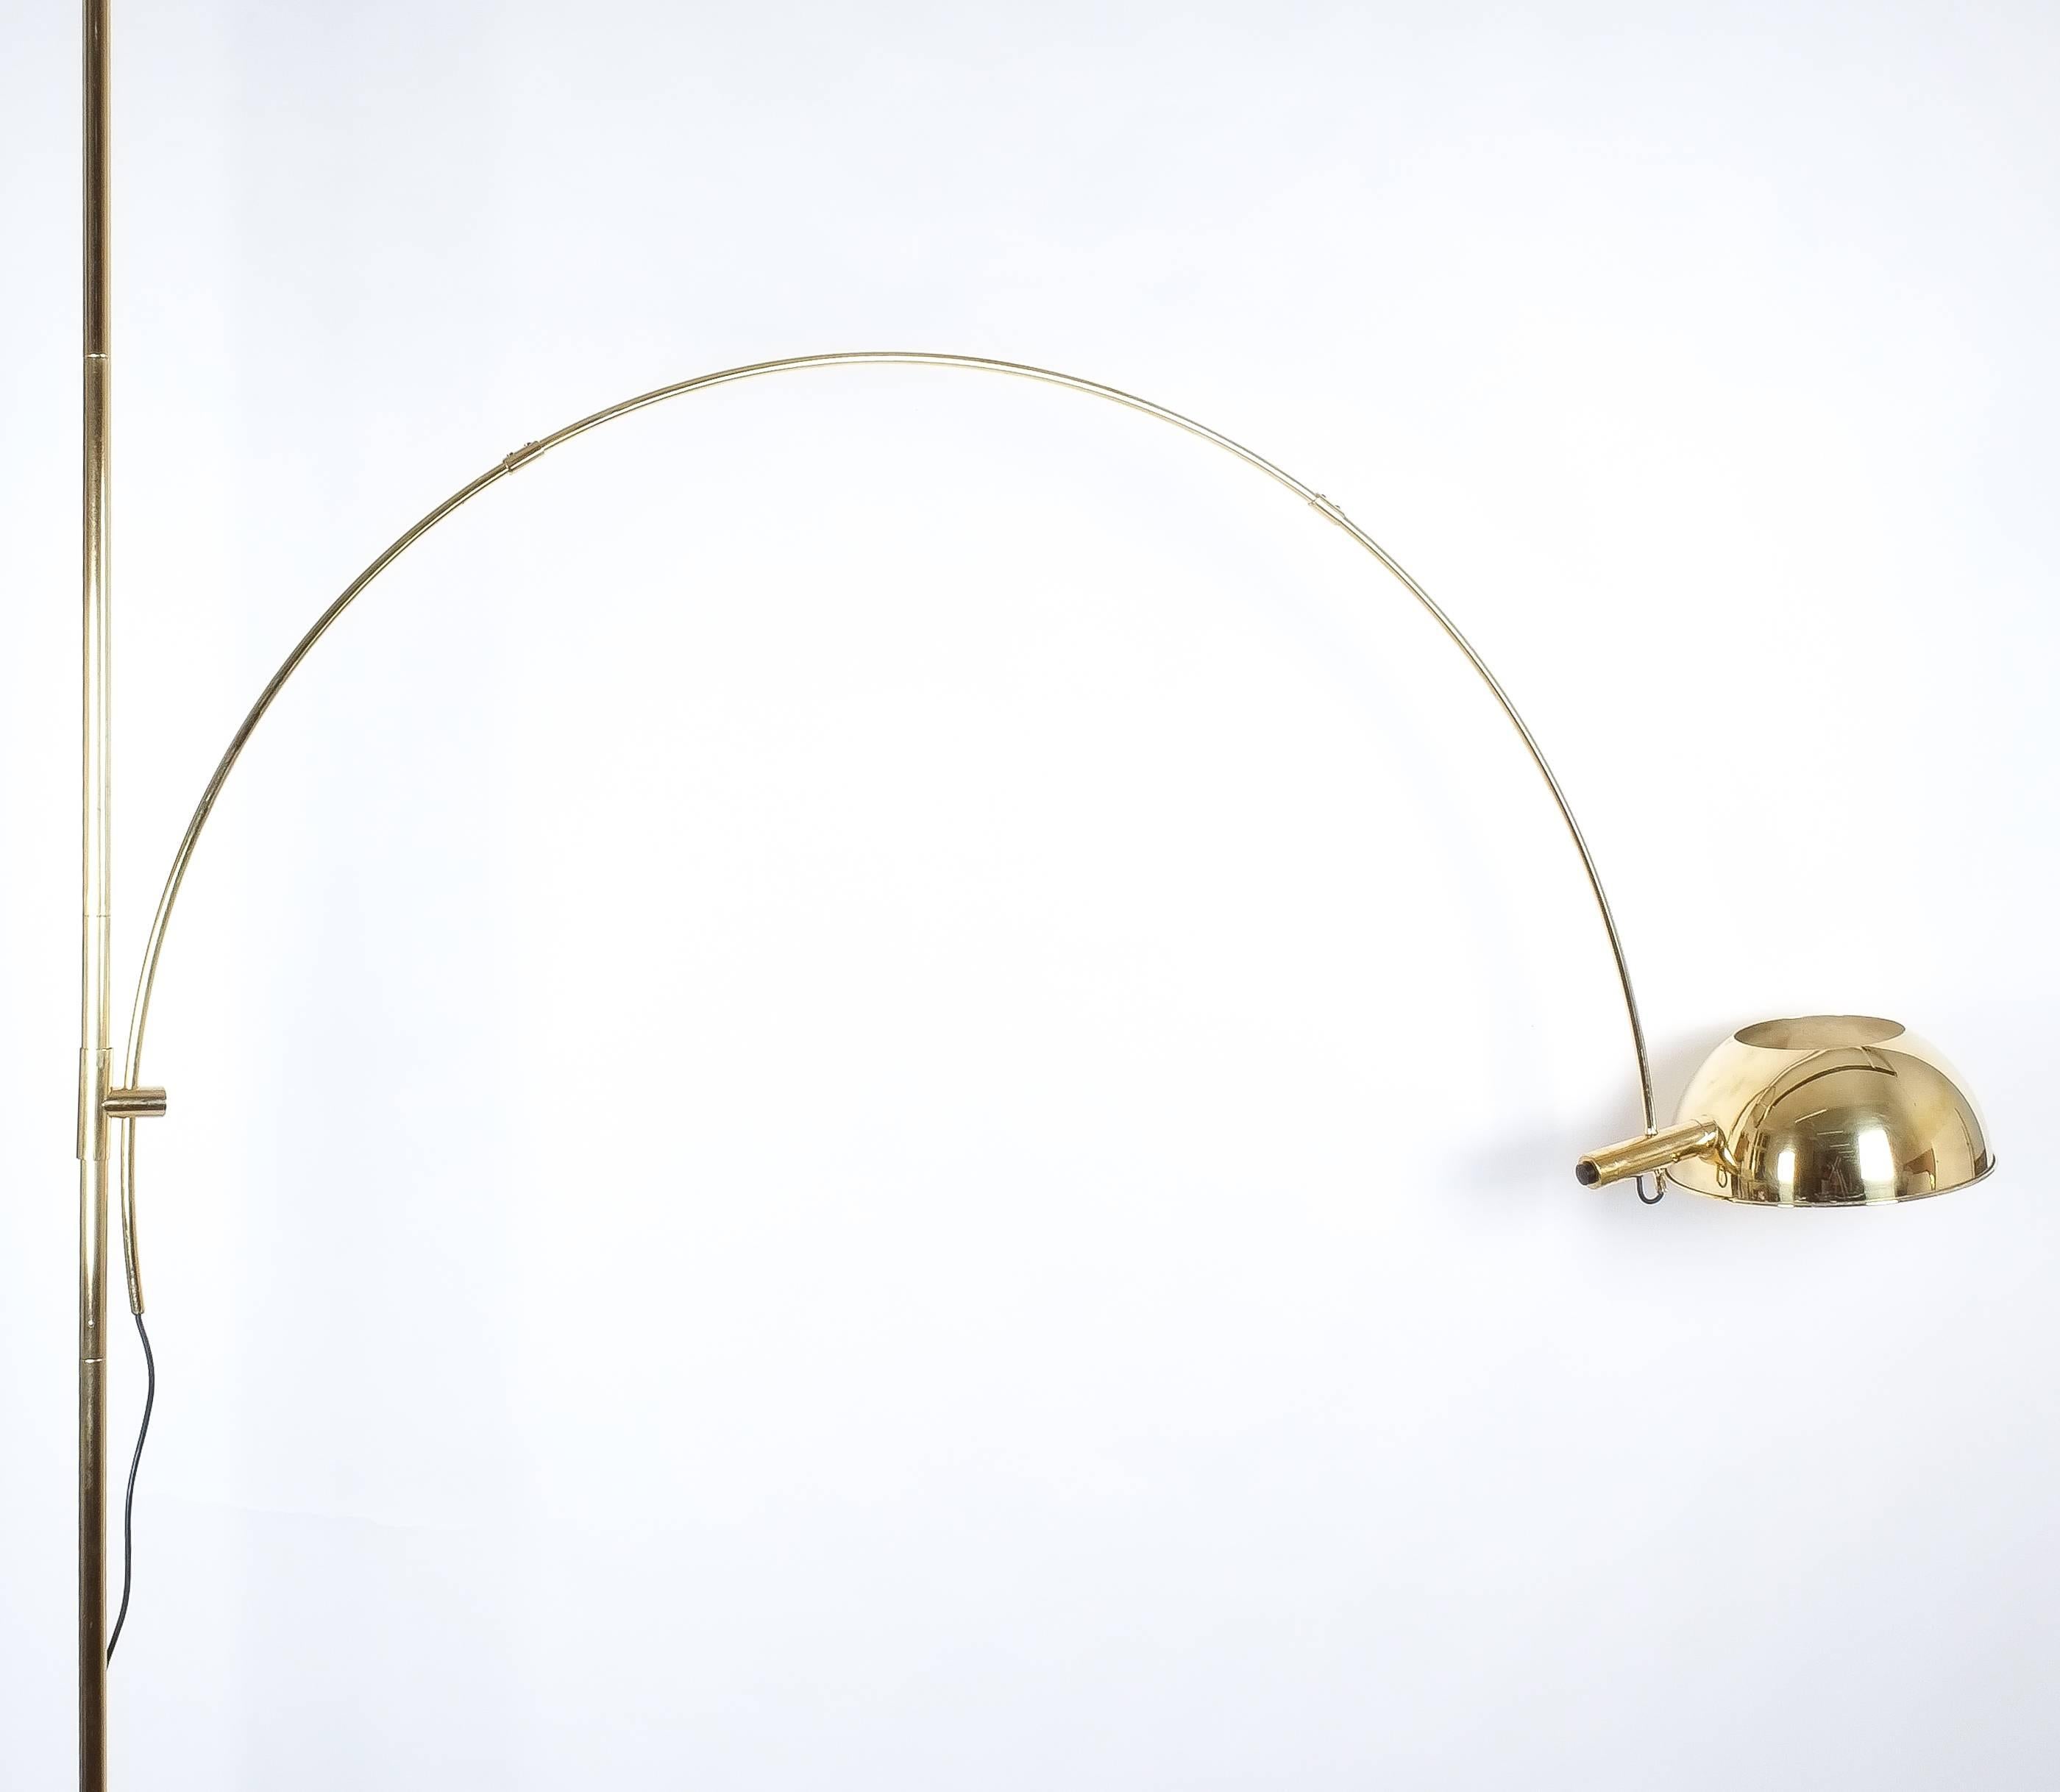 Giant refurbished floor lamp by Florian Schulz, Germany, 1970. This lamp is adjustable an can be pivoted in multiple positions, it is being designed for easily being clamped between ground and ceiling. It has been newly polished and is in excellent